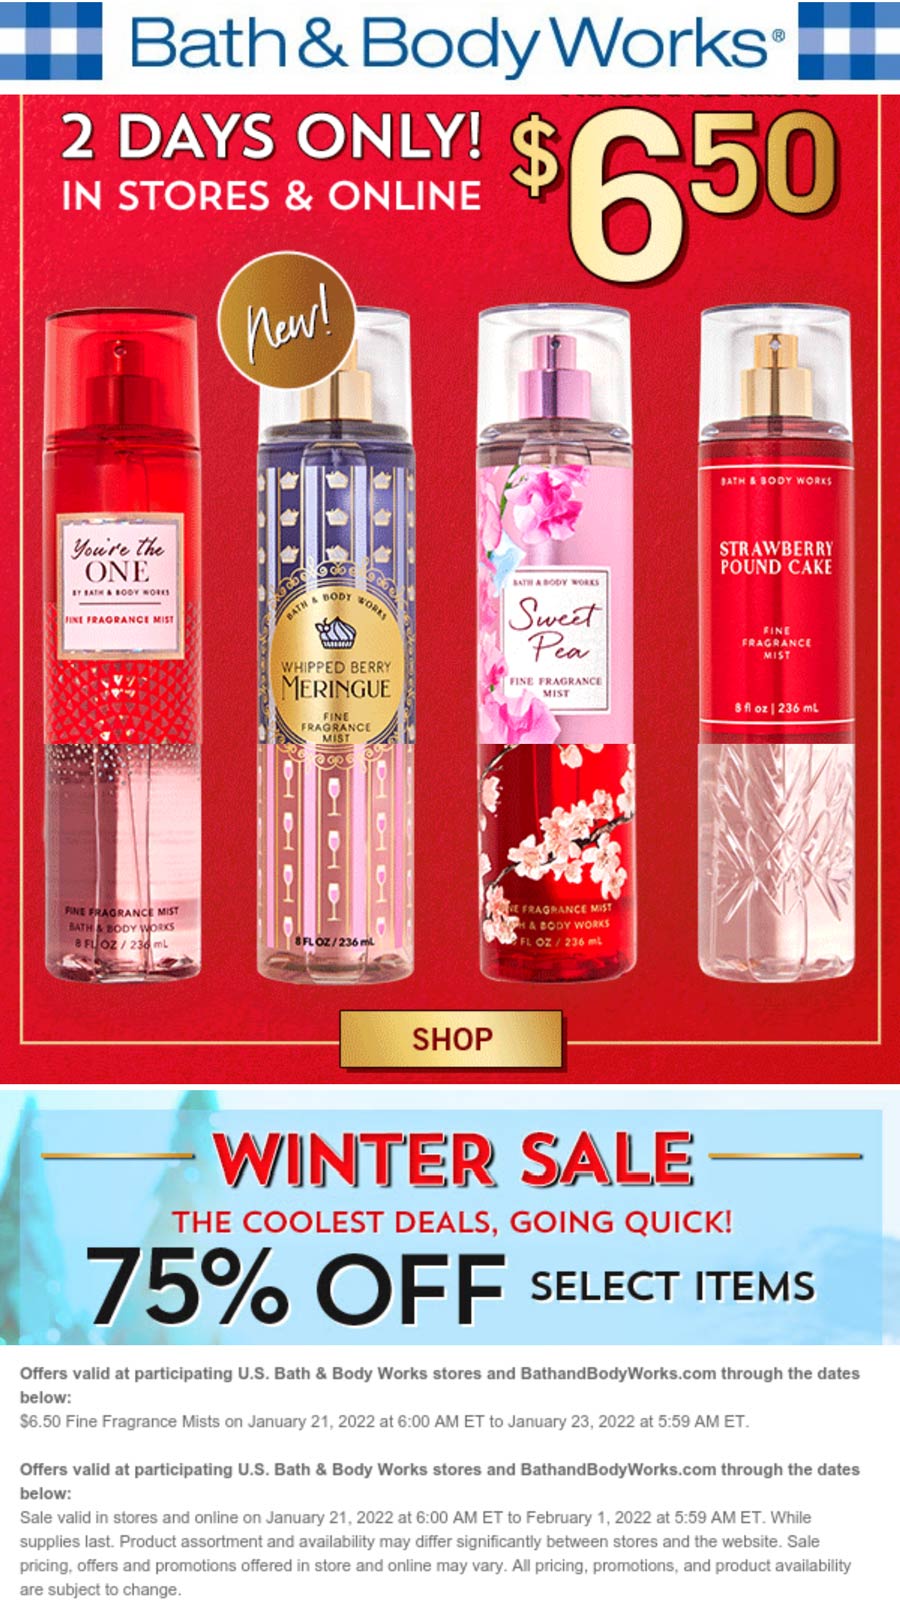 Bath & Body Works stores Coupon  All fragrance mists $6.50 at Bath & Body Works, ditto online #bathbodyworks 